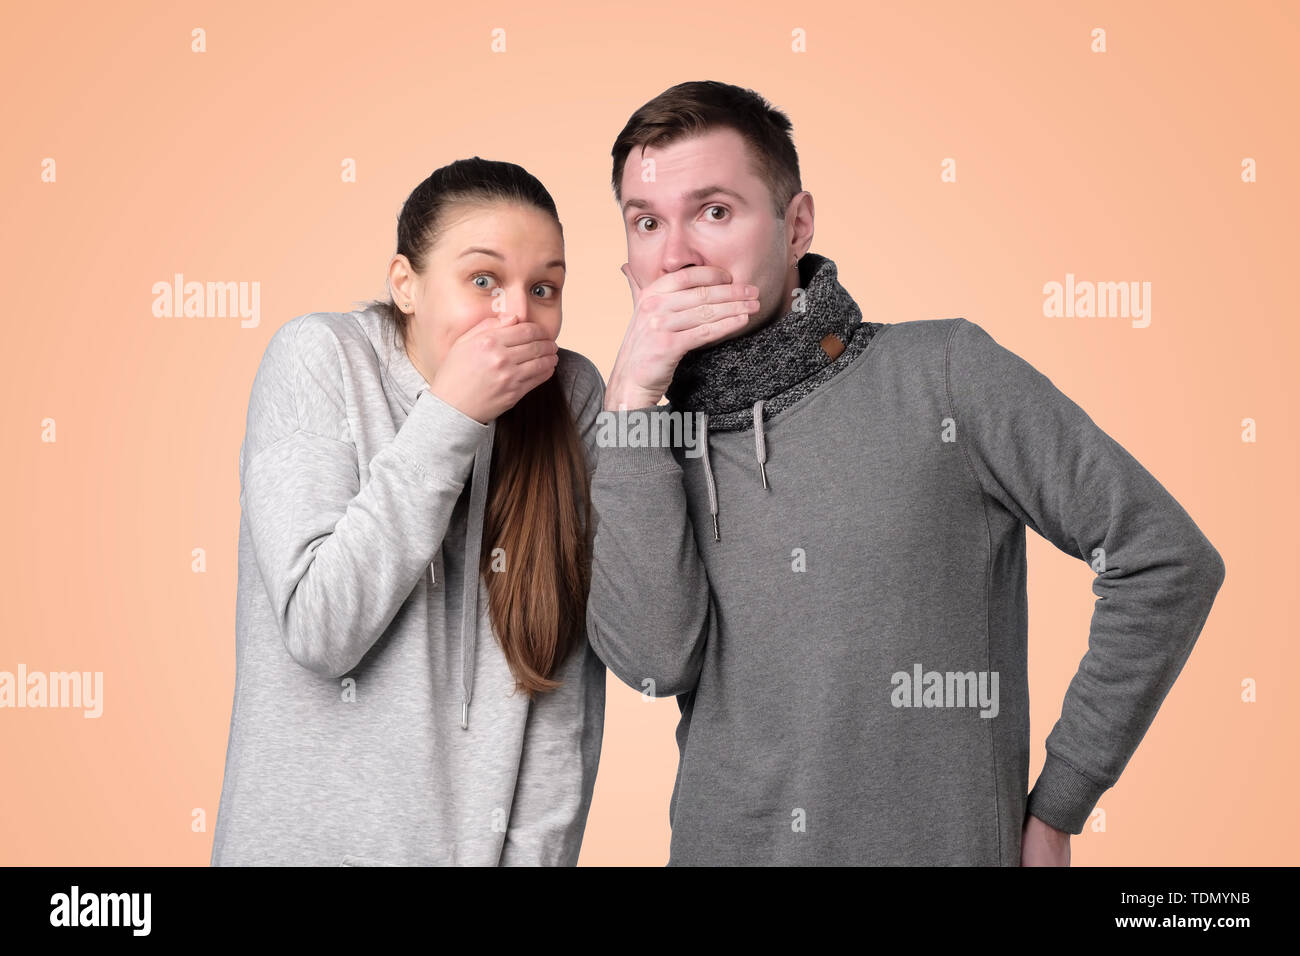 man and woman laughing and covering mouth with hand Stock Photo